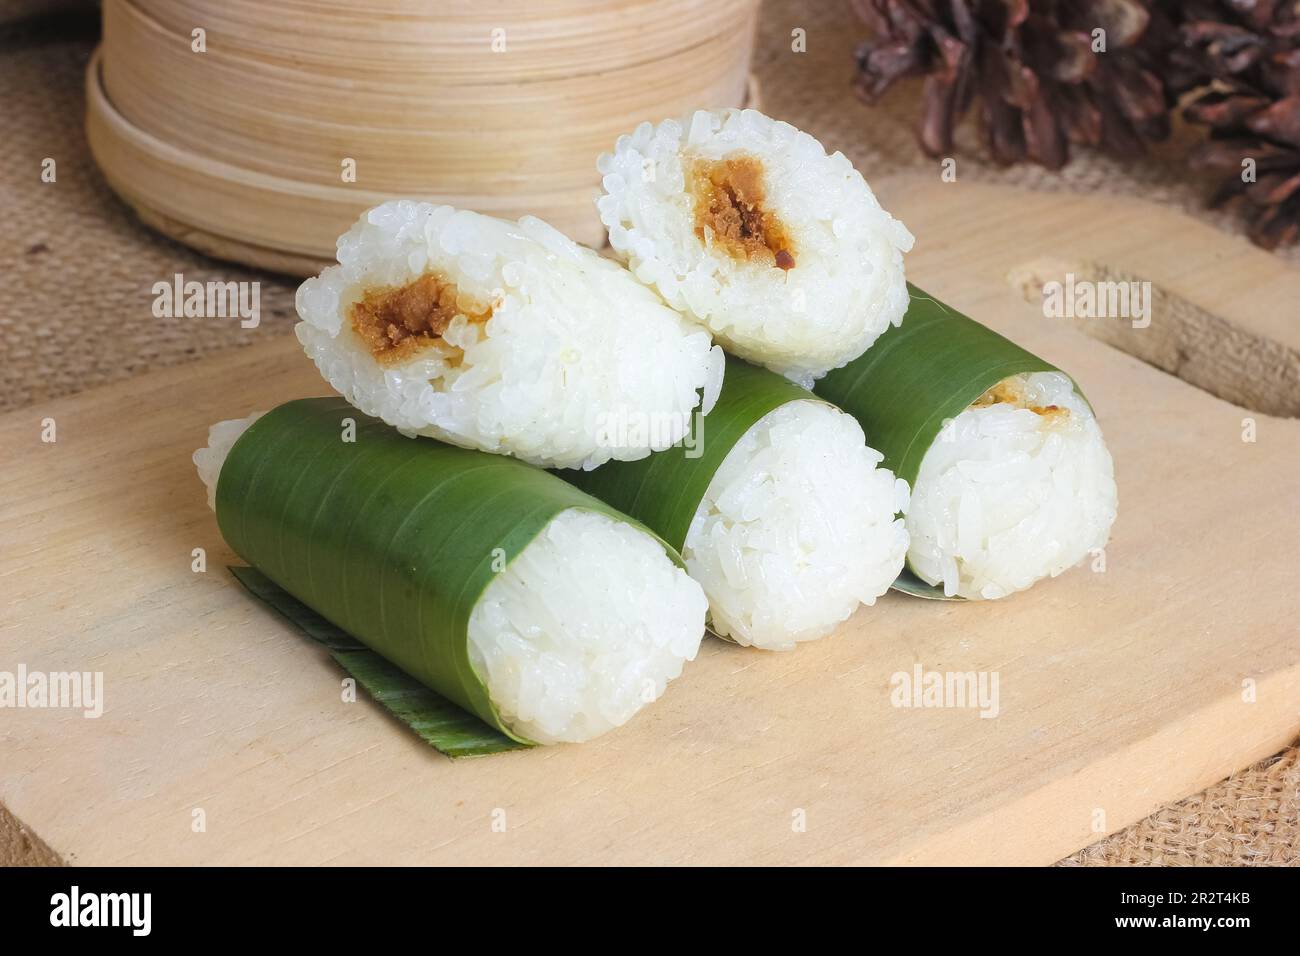 Indonesian traditional food lemper. rice cakes with banana leaves and chicken inside Stock Photo